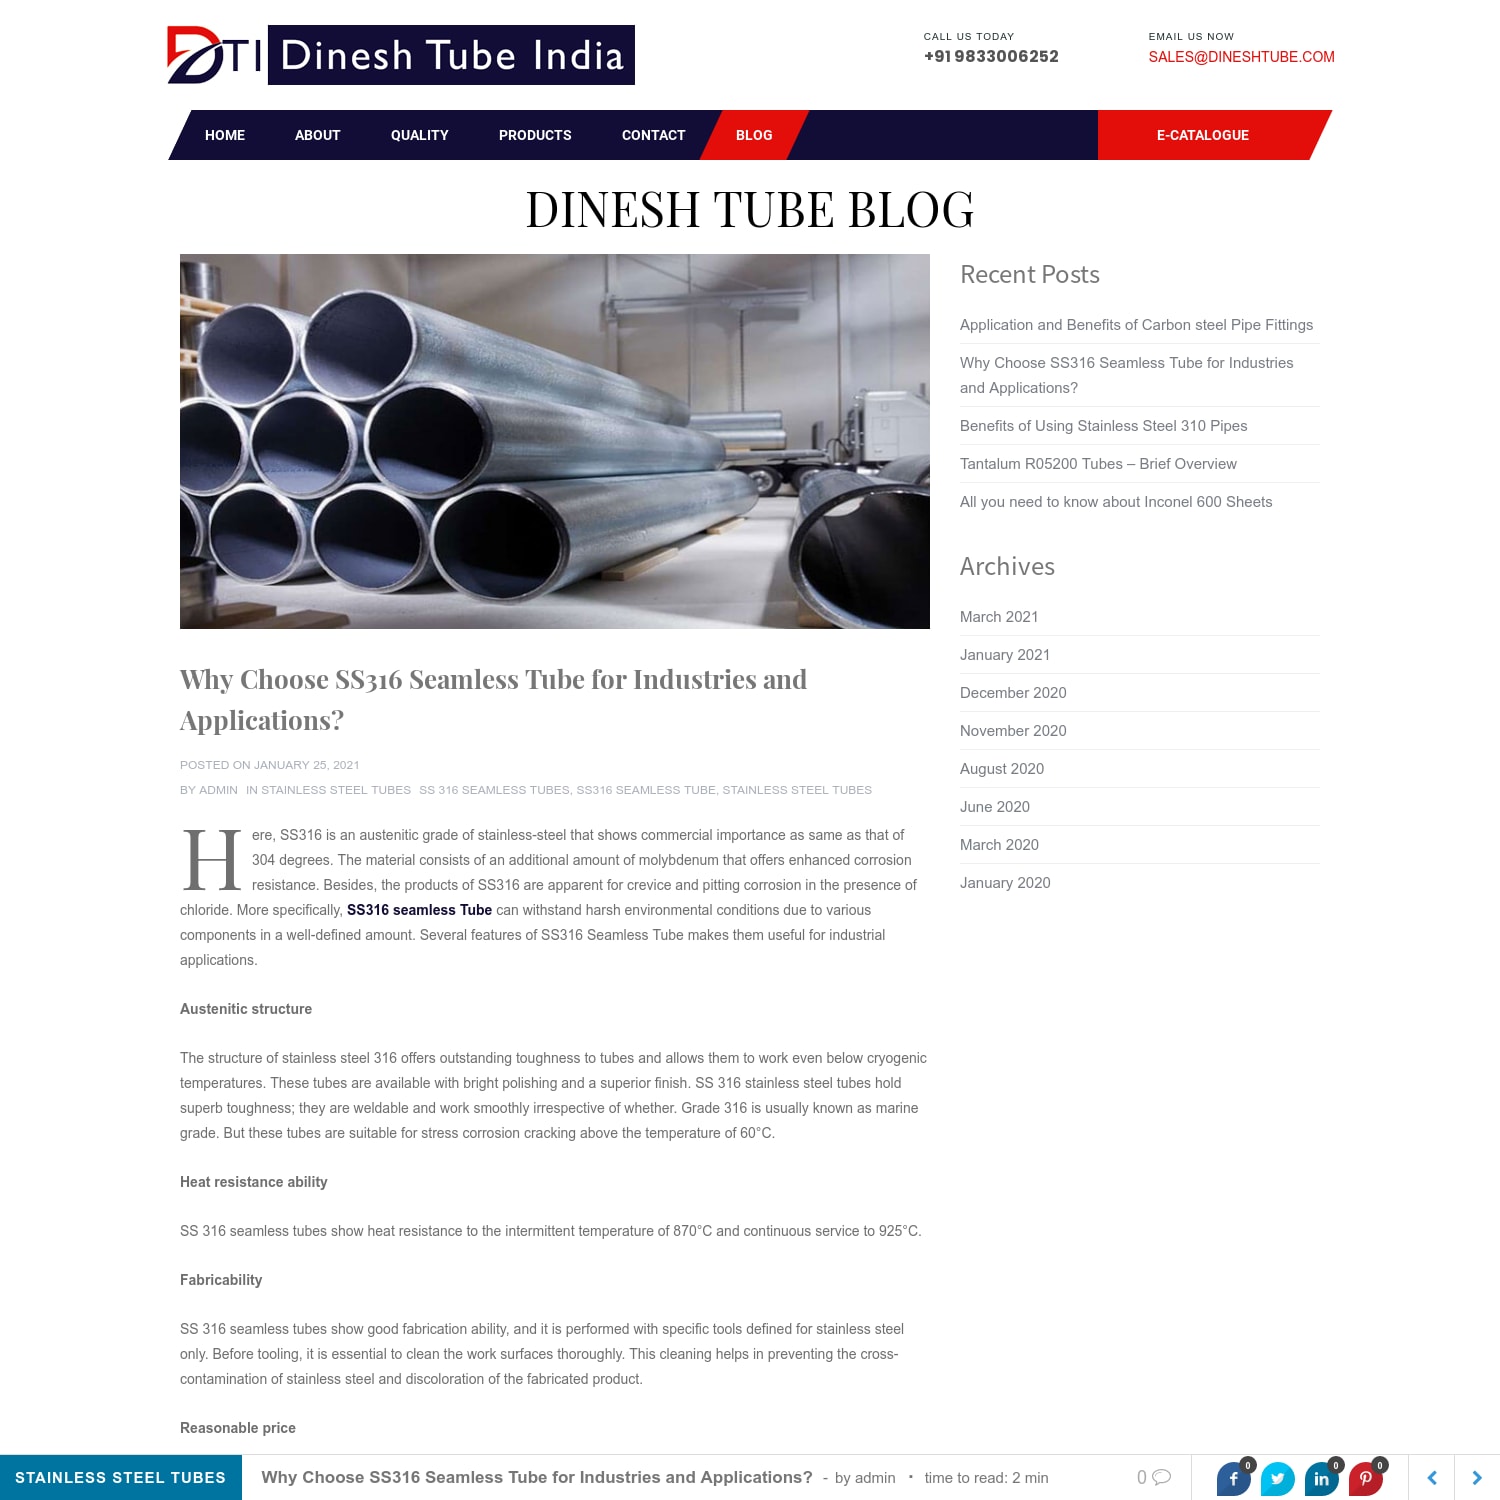 Why Choose SS316 Seamless Tube for Industries and Applications? - Dinesh Tube Blog